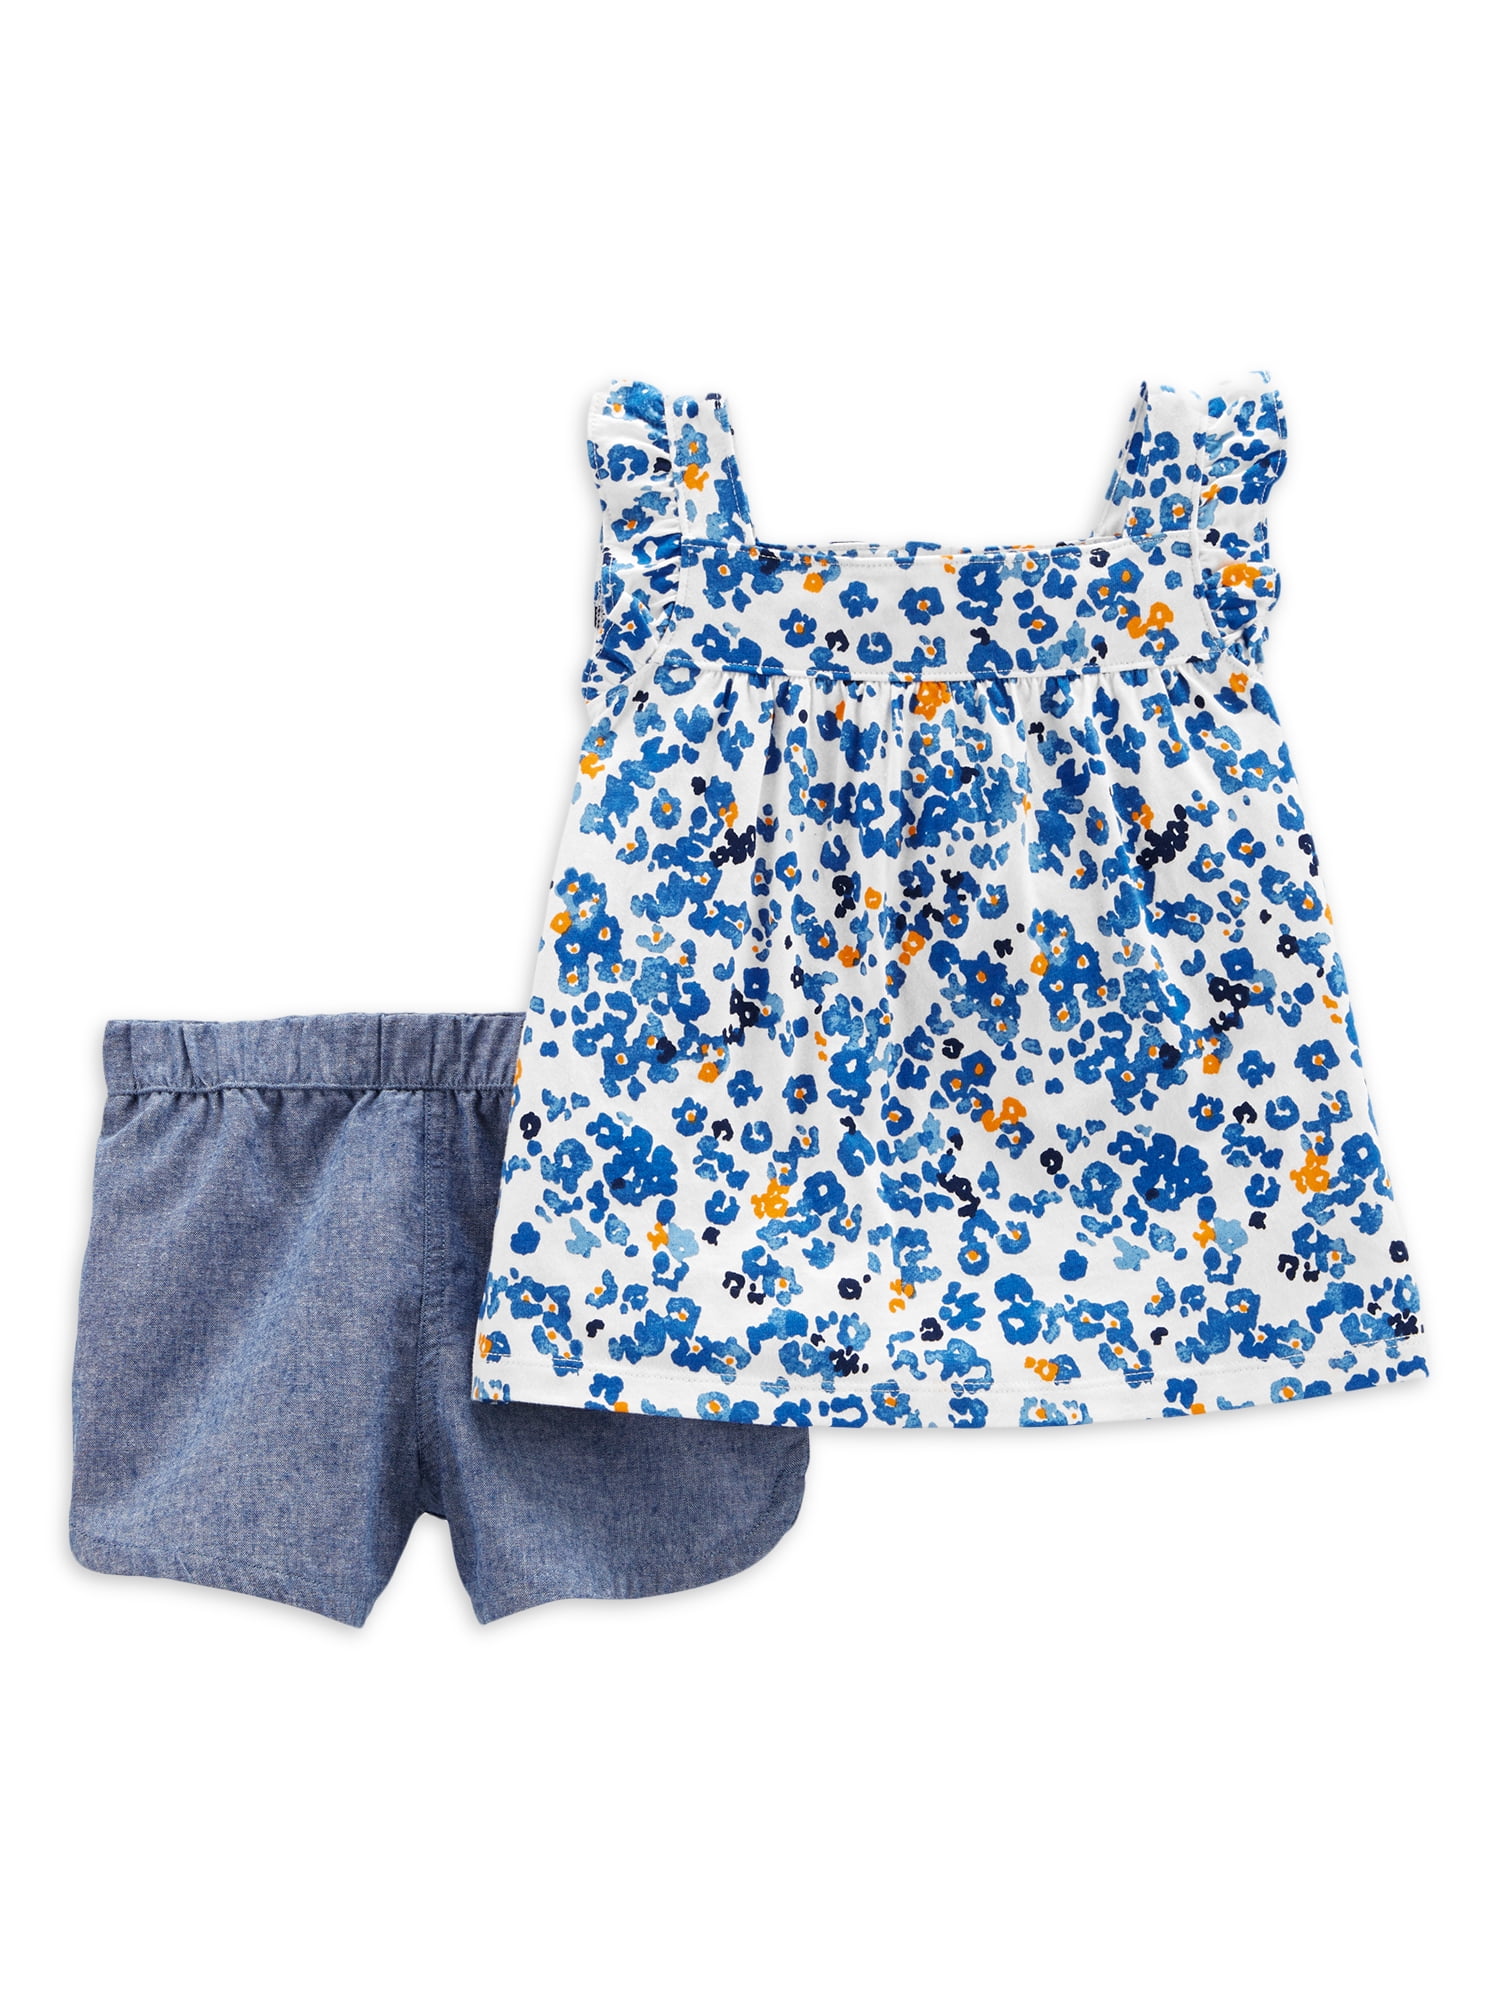 NEW Girls 2pc Outfit Size 4T Blue Floral Smocked Sleeveless Top Denim Shorts Set 